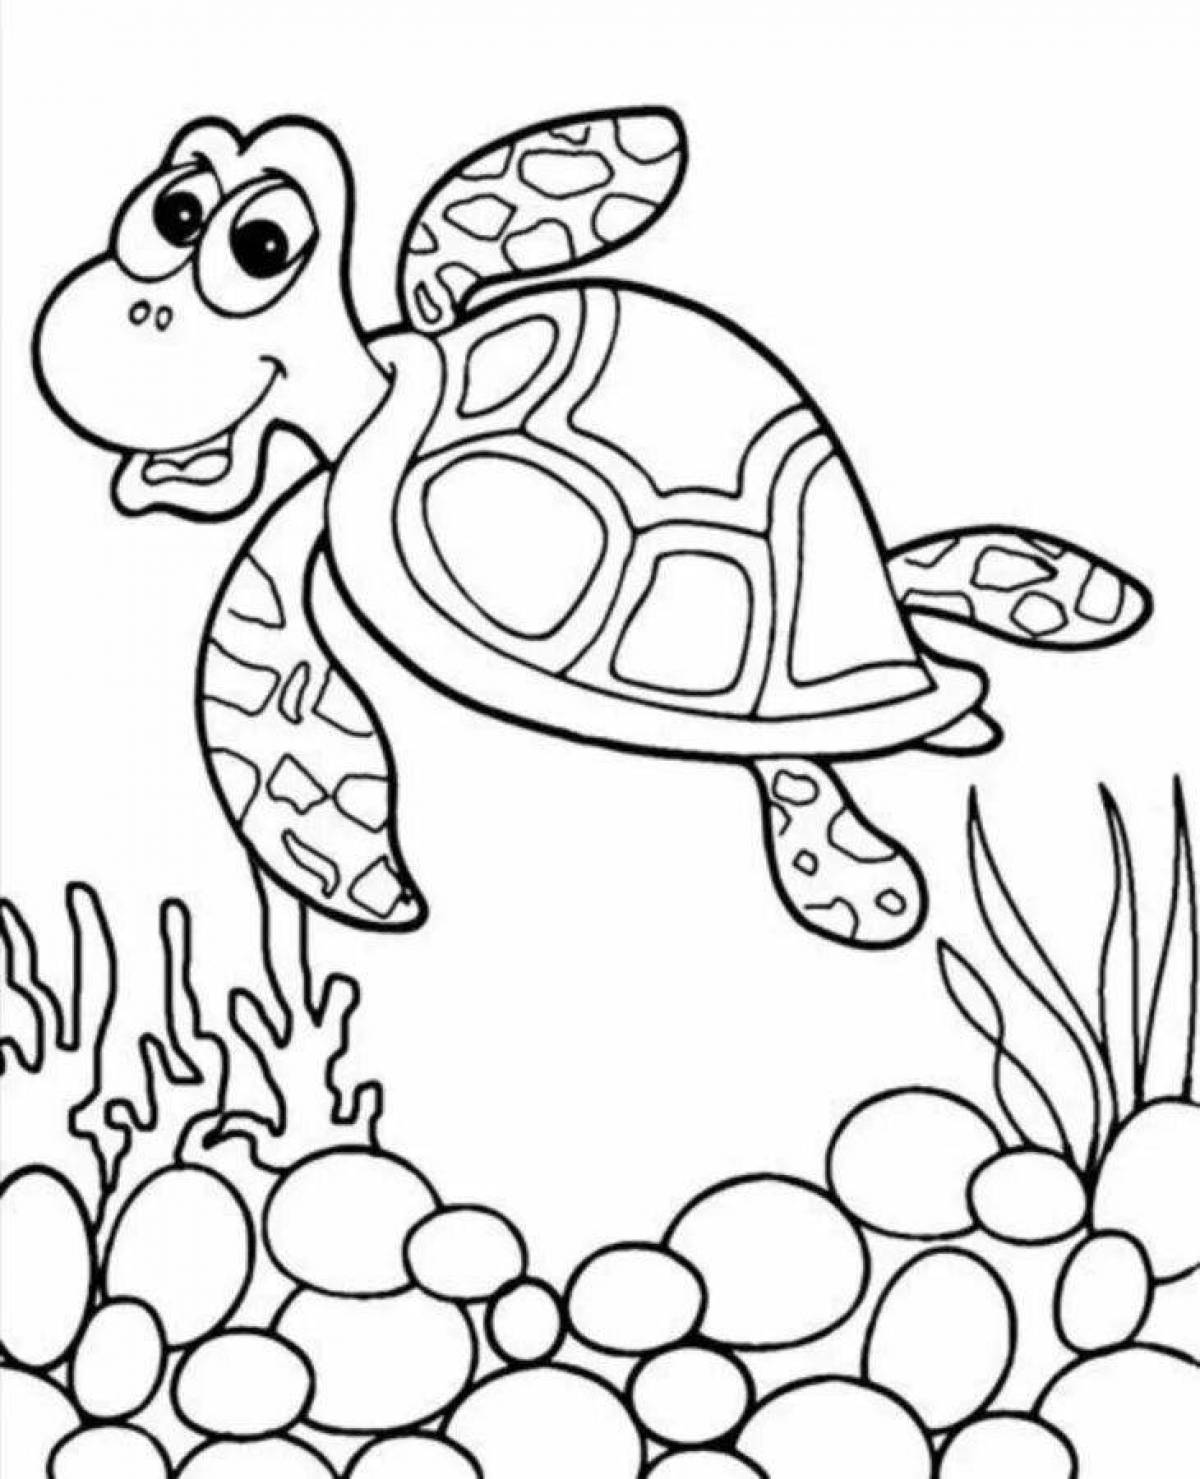 Joyful turtle coloring book for 3-4 year olds